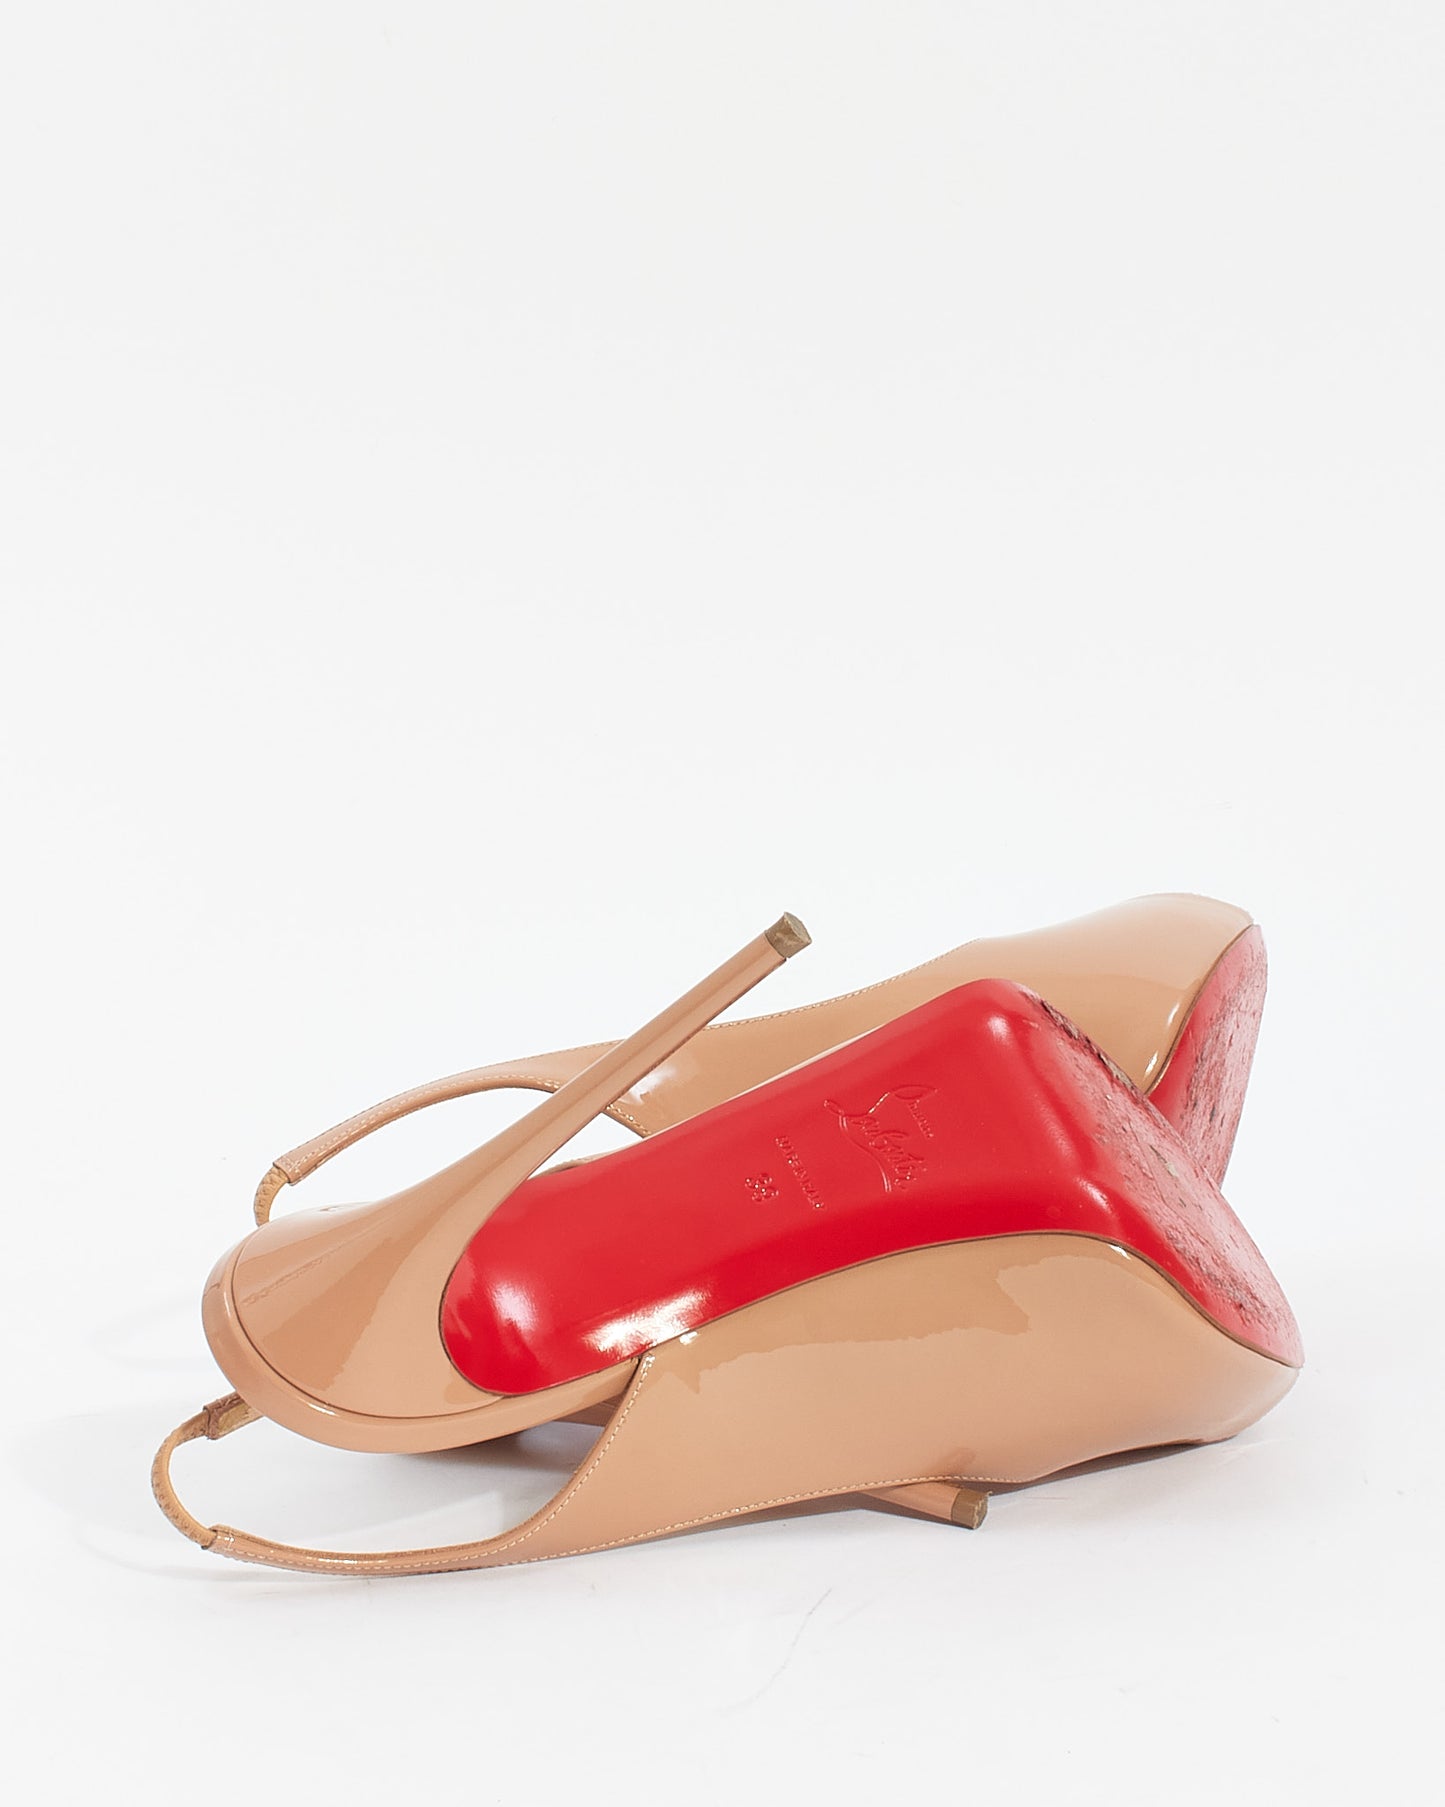 Christian Louboutin Nude Patent Leather Private Number Peep Toe Pumps - 39